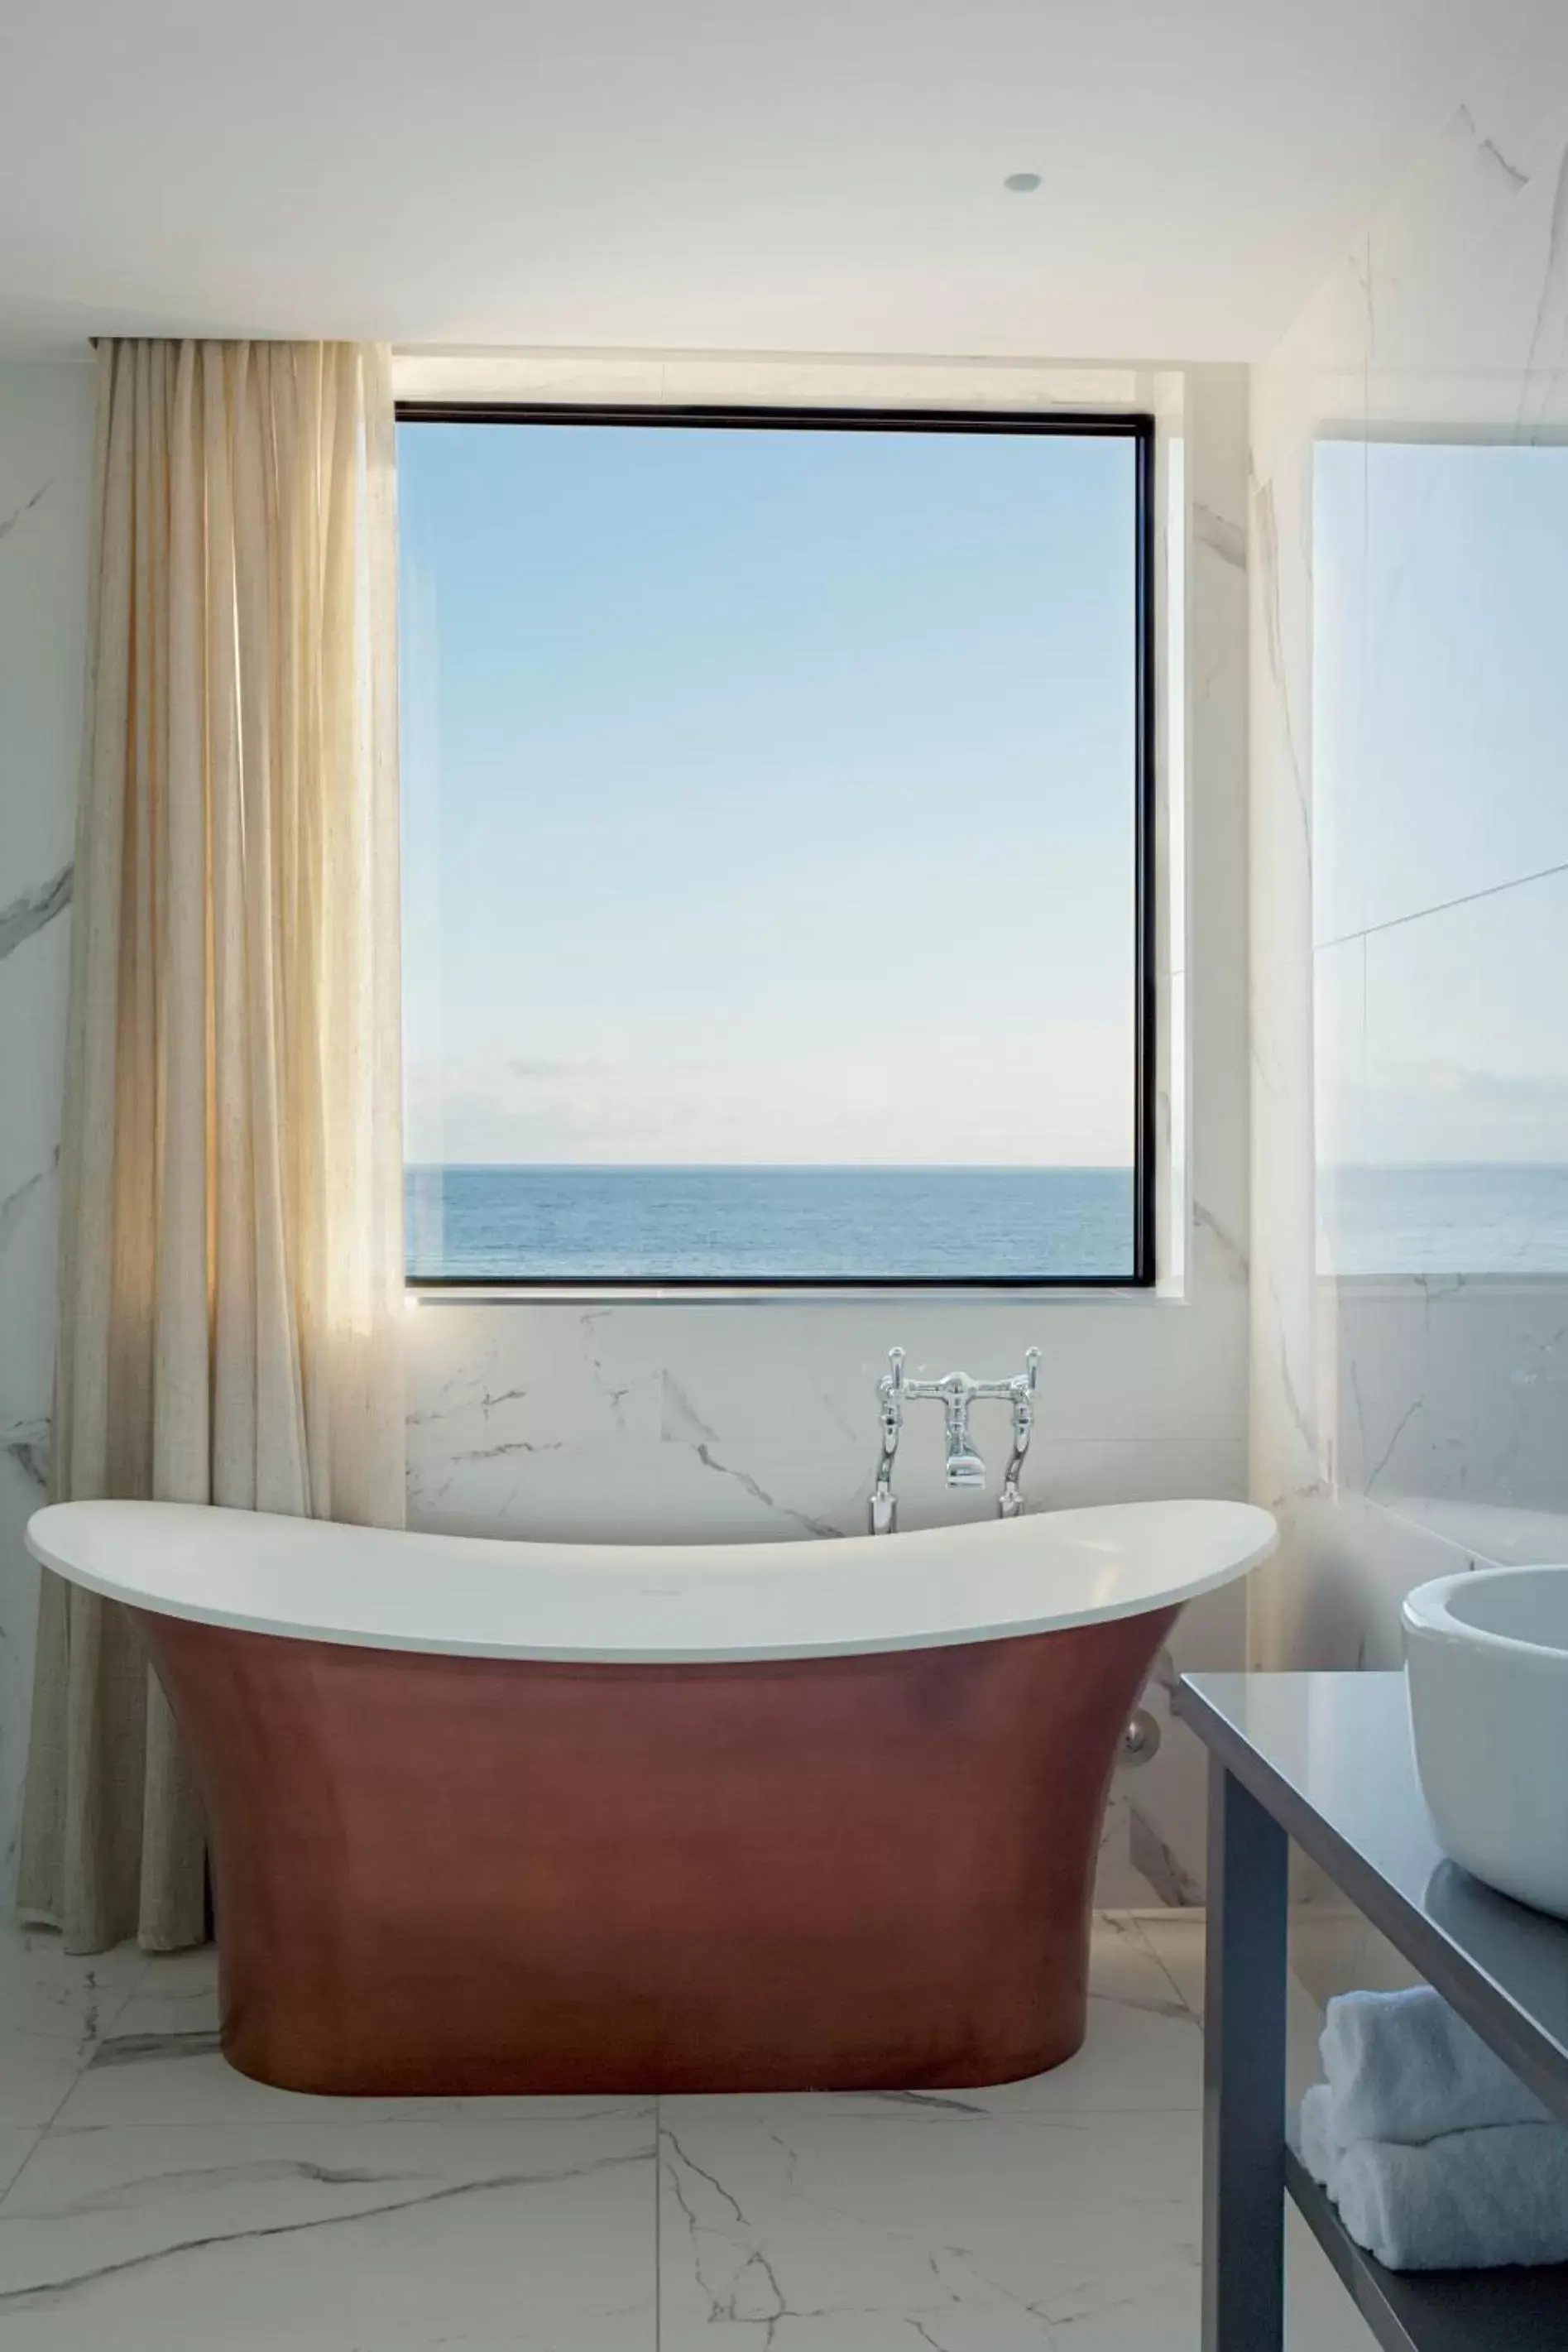 Bathroom in Carbis Bay and Spa Hotel